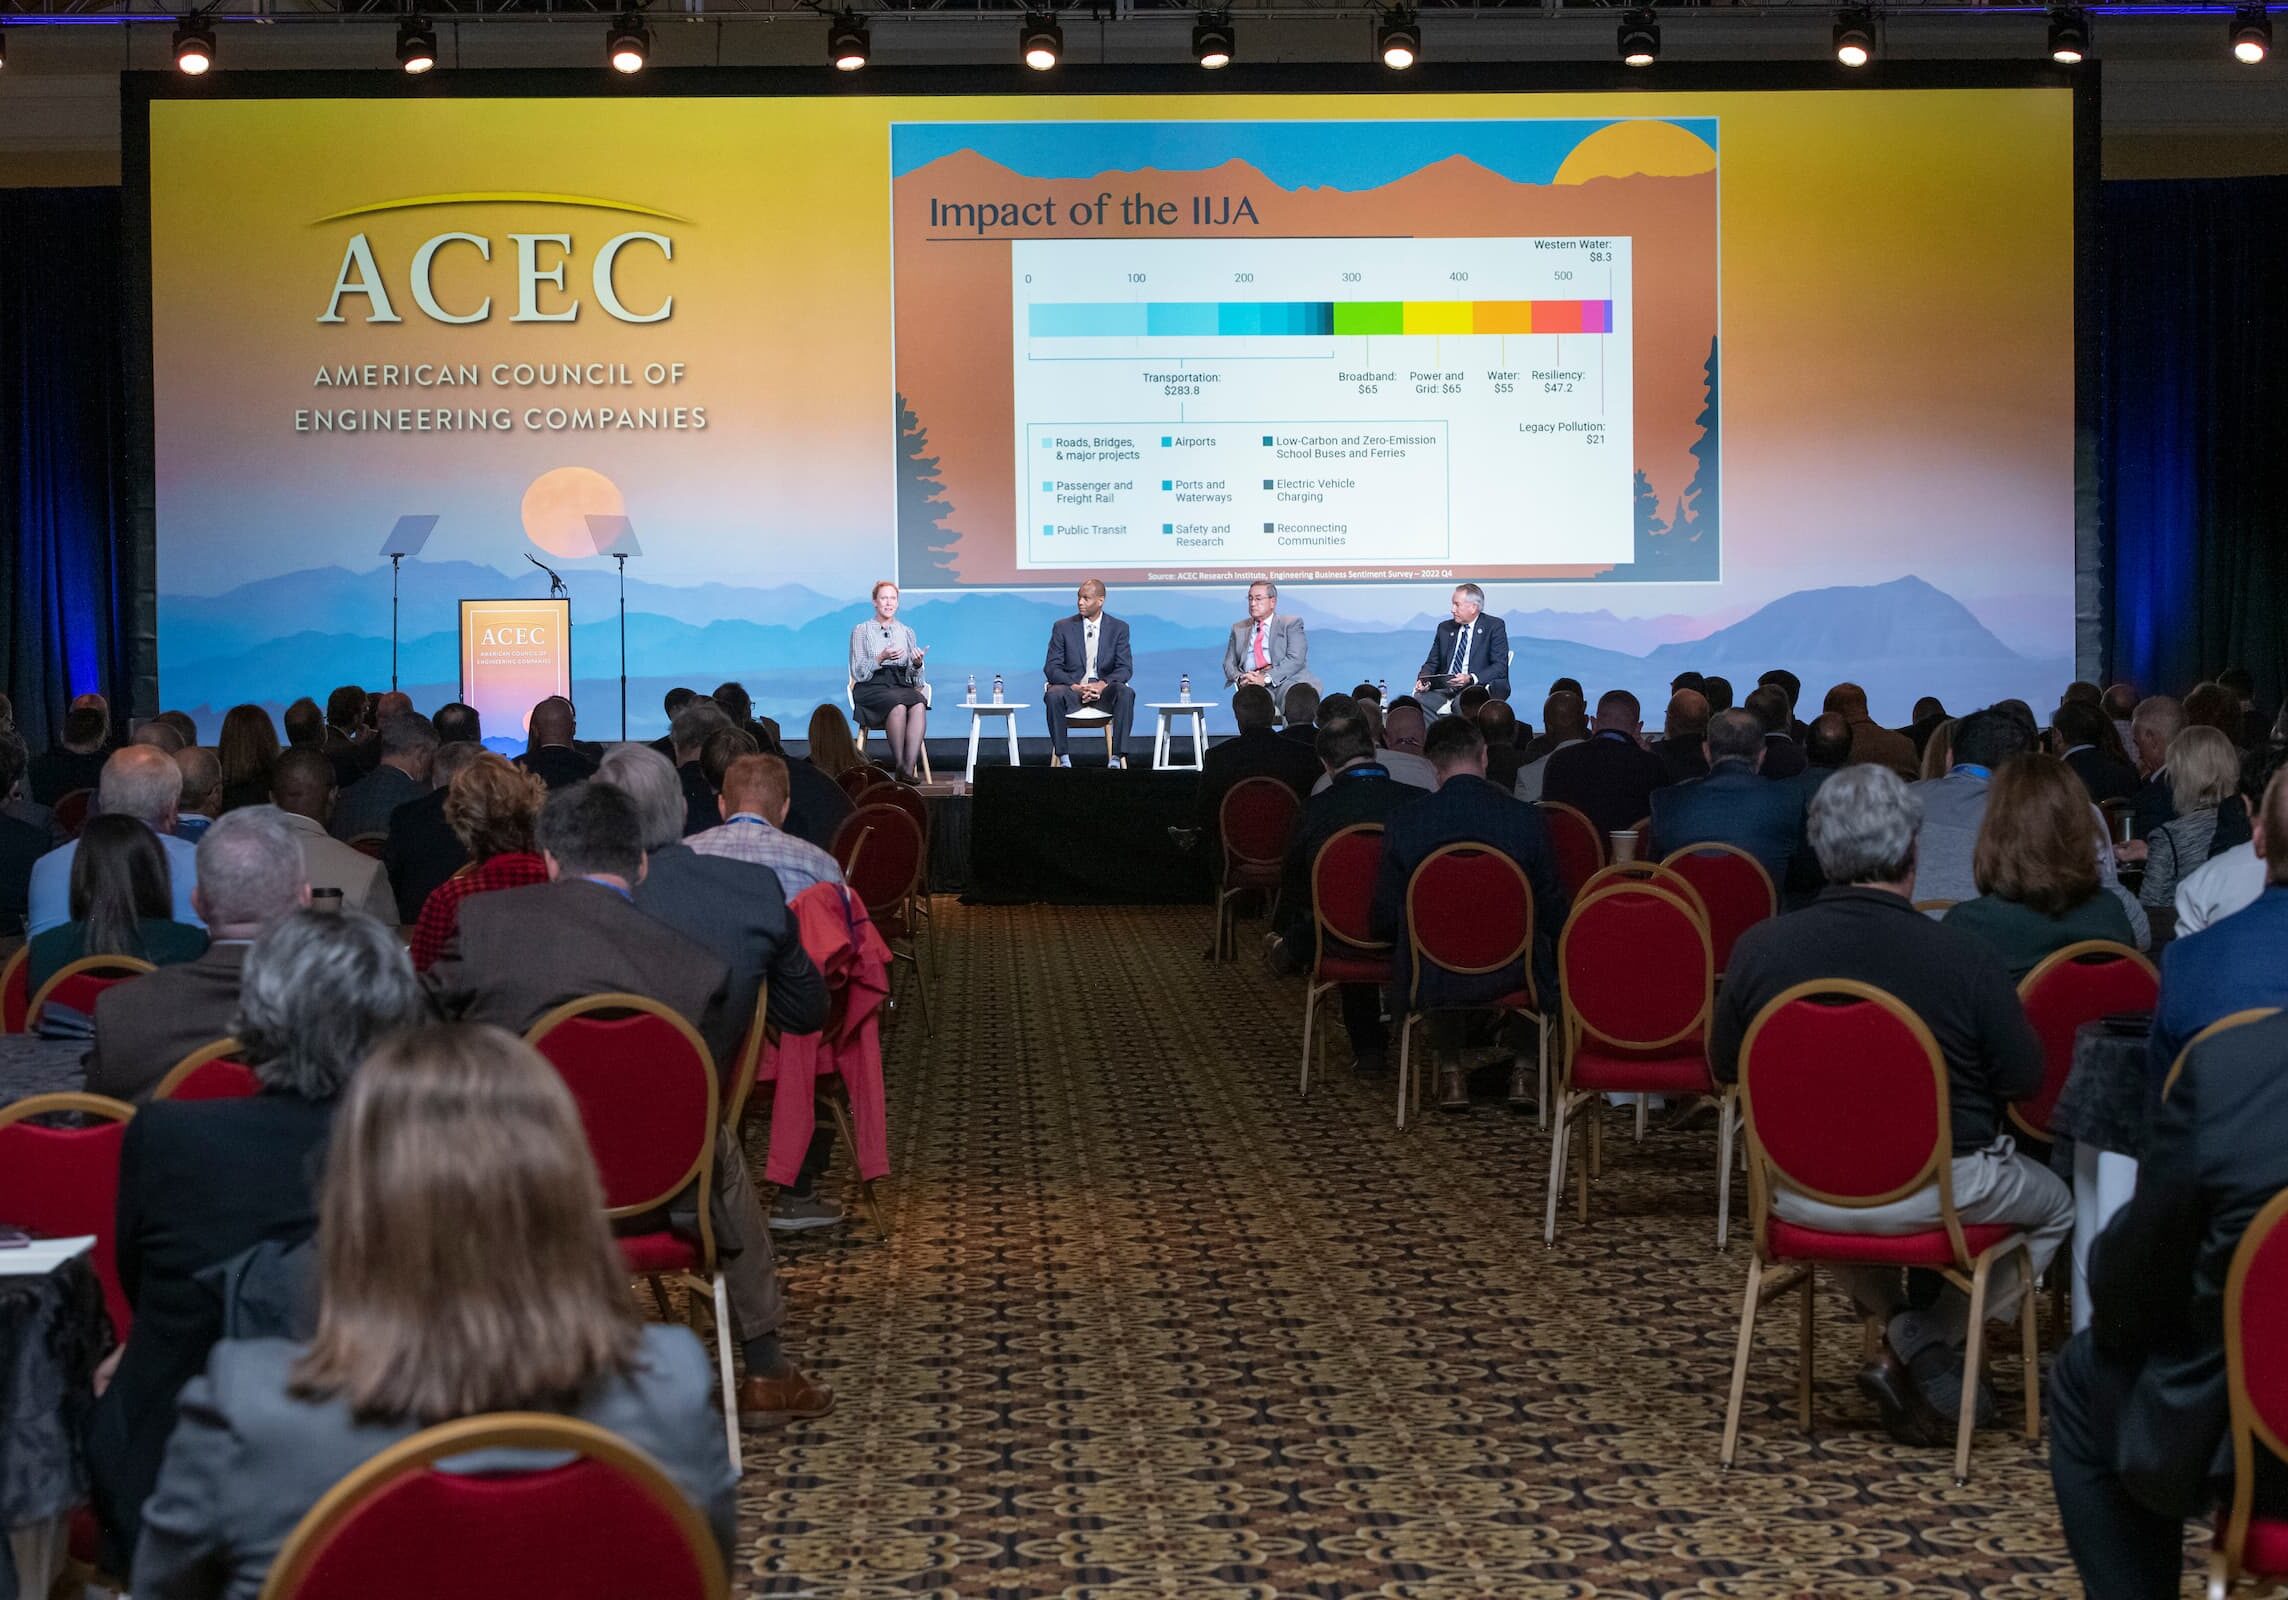 Speakers sitting and talking on stage during an ACEC Event